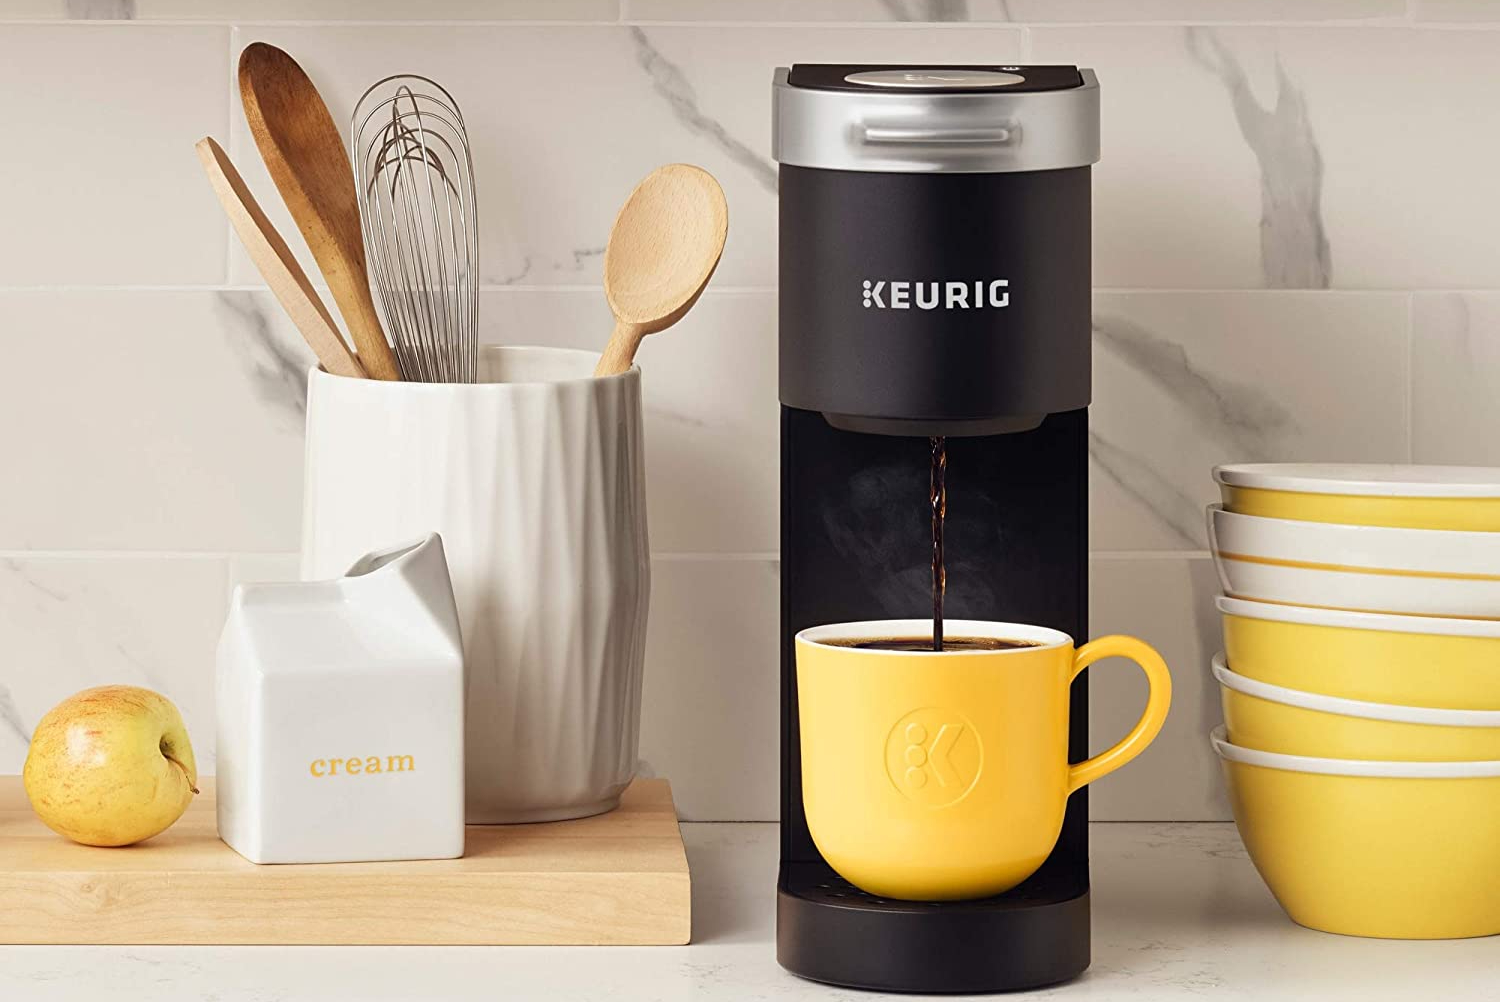 kitchen deals: Save on Keurig, Cuisinart before October Prime Day -  Reviewed